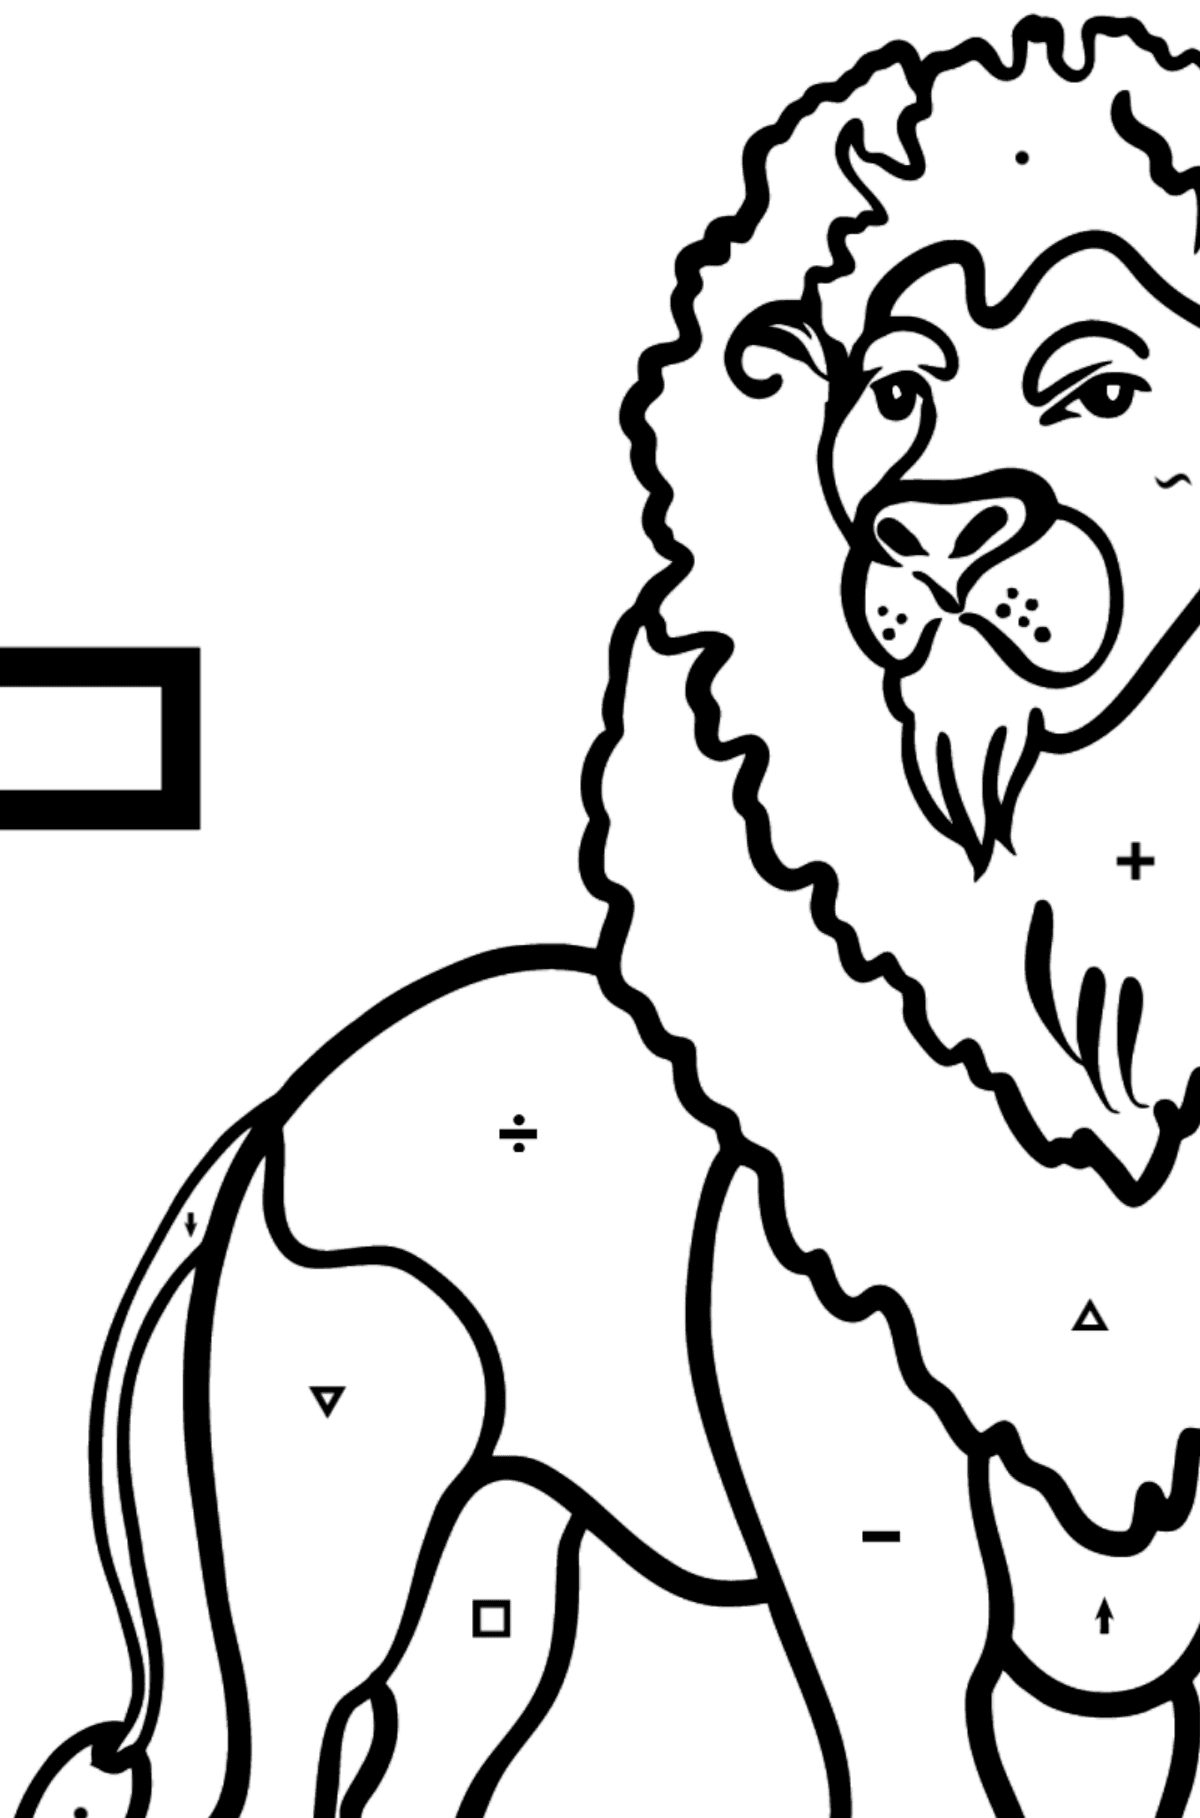 Spanish Letter L coloring pages - LEON - Coloring by Symbols for Kids